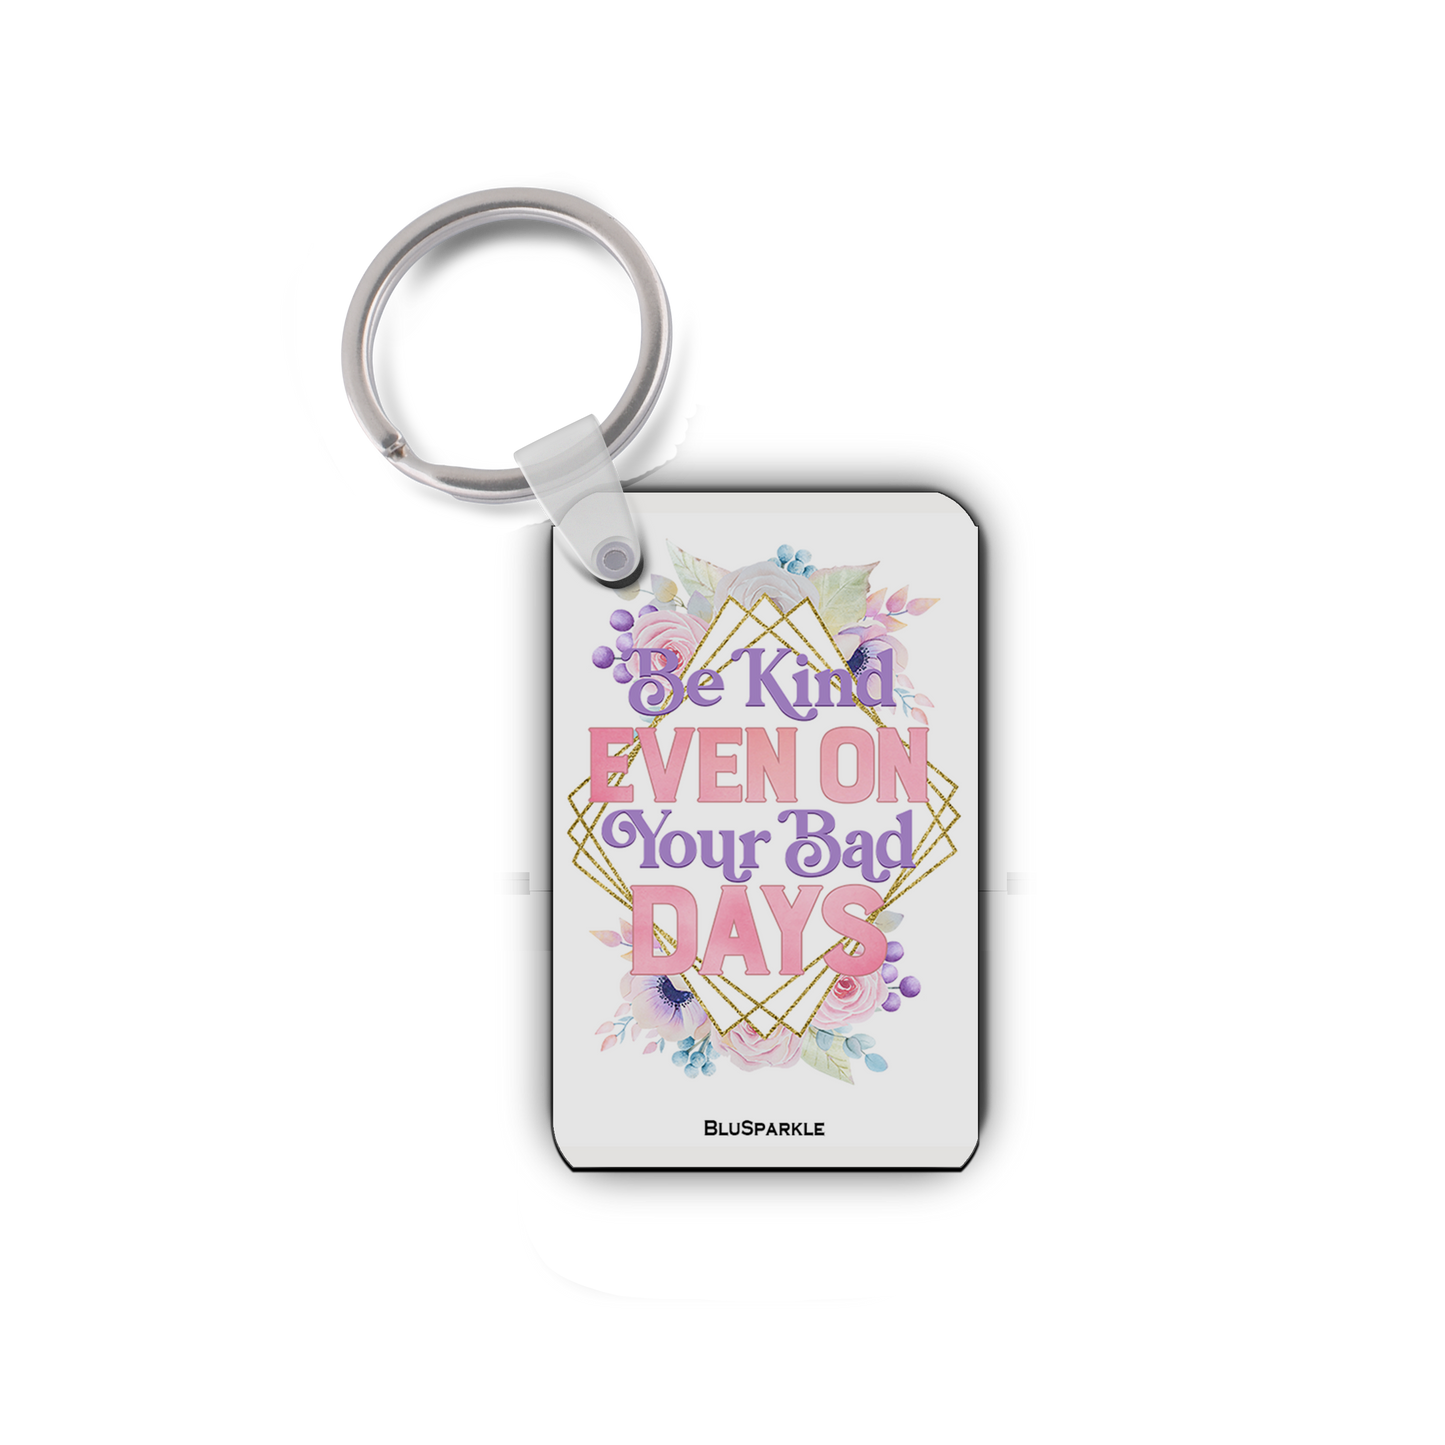 Be Kind Even on Your Bad Days - Double Sided Key Chain